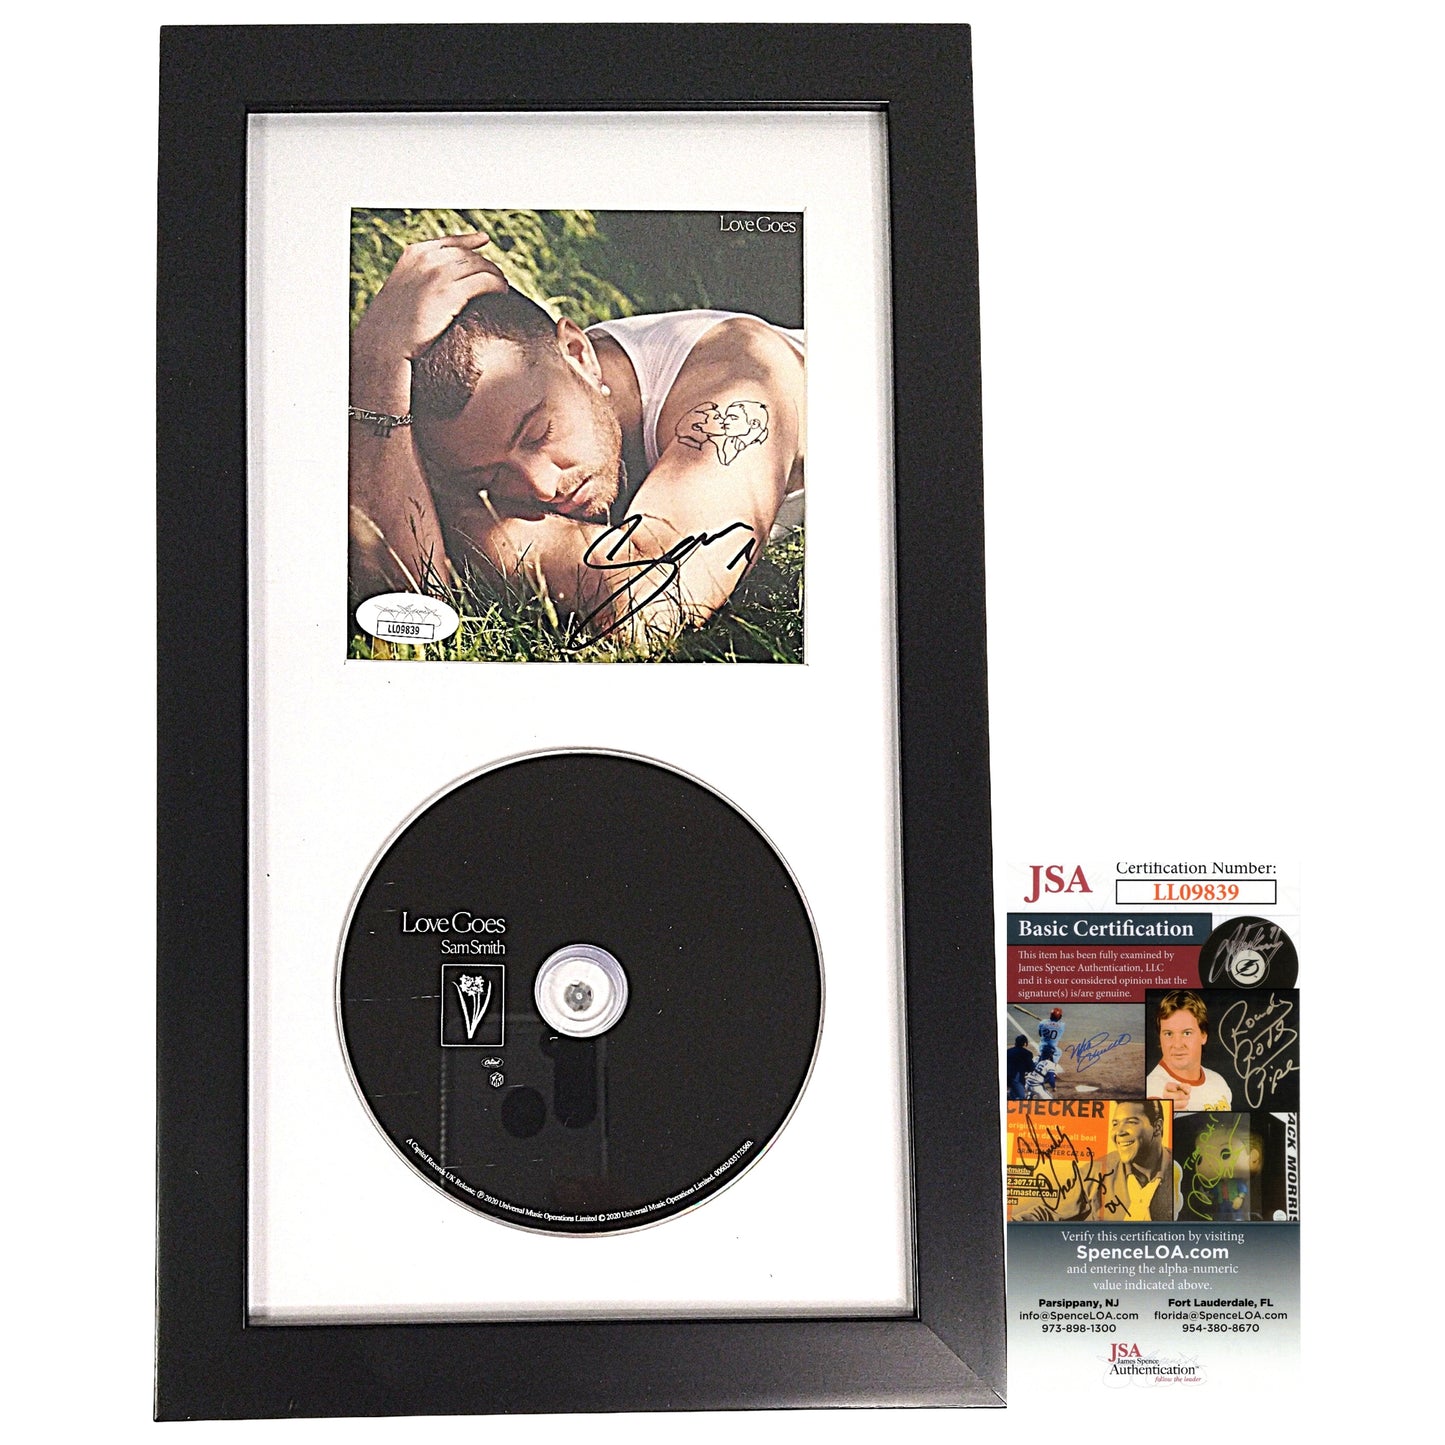 Music- Autographed- Sam Smith Signed Love Goes Framed Compact Disc Cover Booklet with CD- JSA Authentication 201